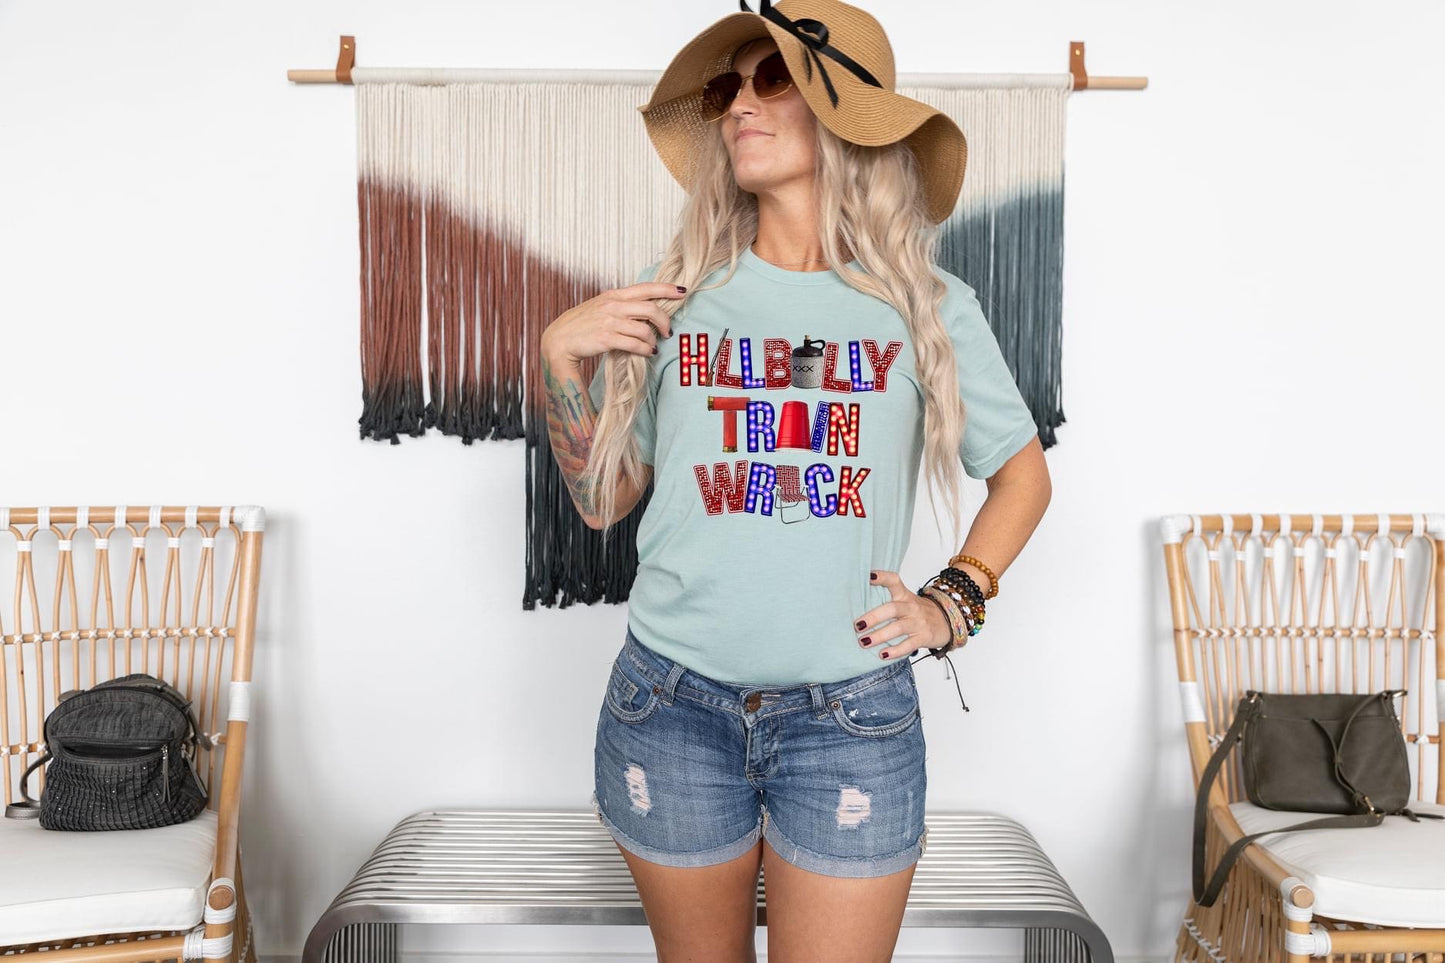 PREORDER - Hillbilly Train Wreck Soft Boutique Tee